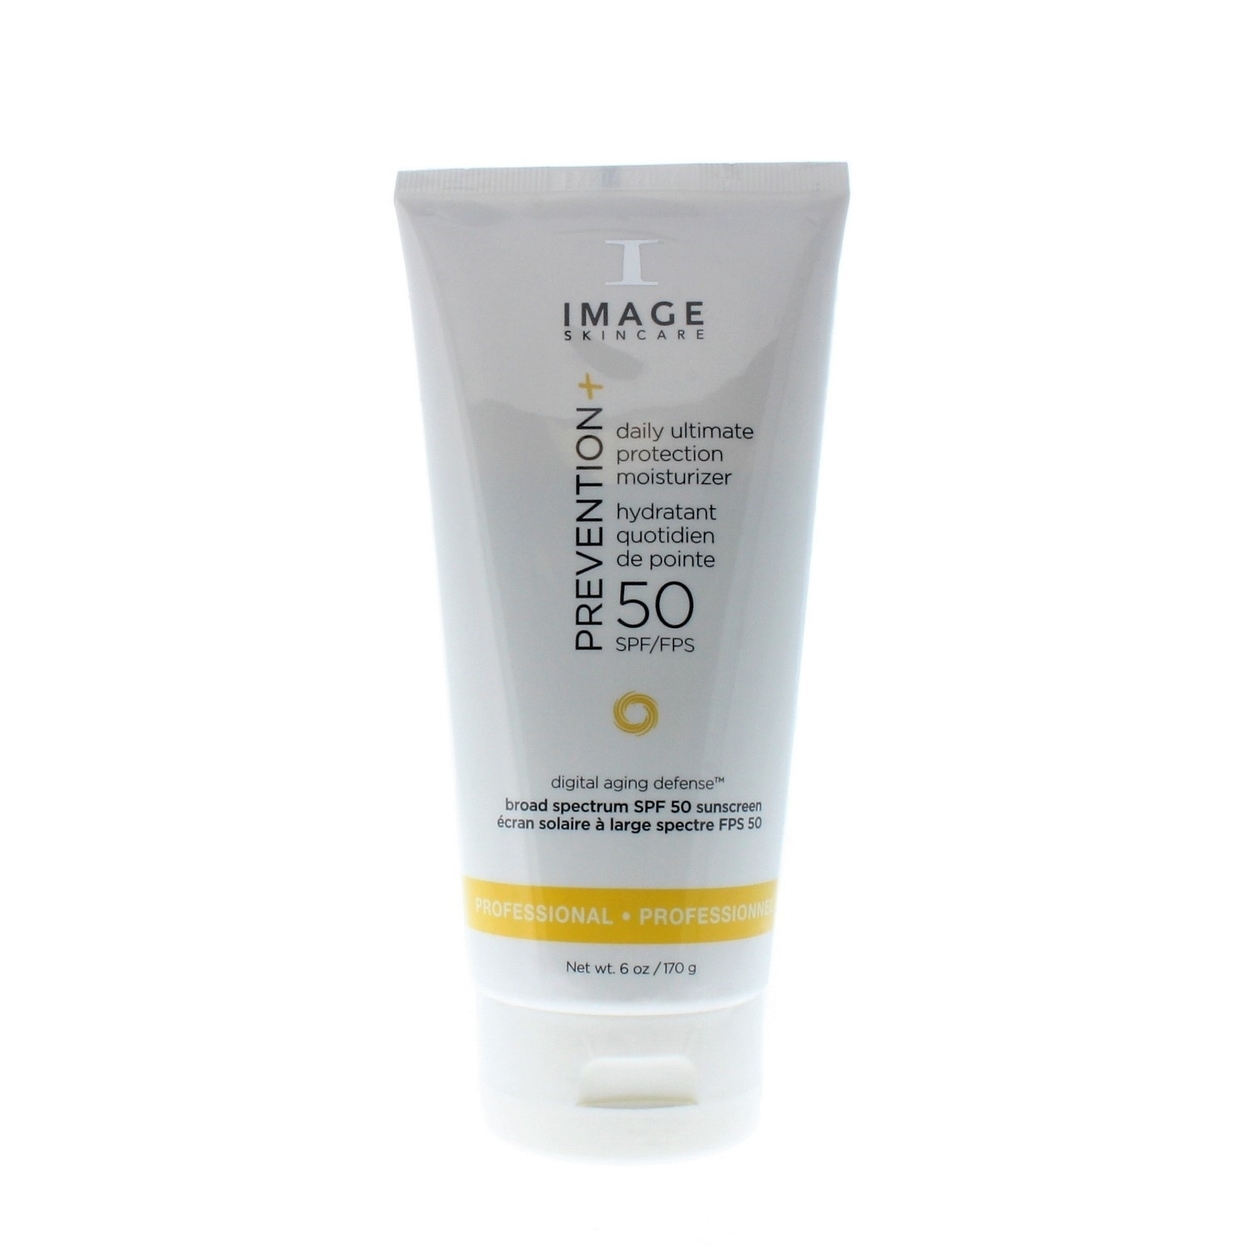 Image Skincare Prevention+ Daily Ultimate Protection Moisturizer SPF 50 6oz/170g (Pro)